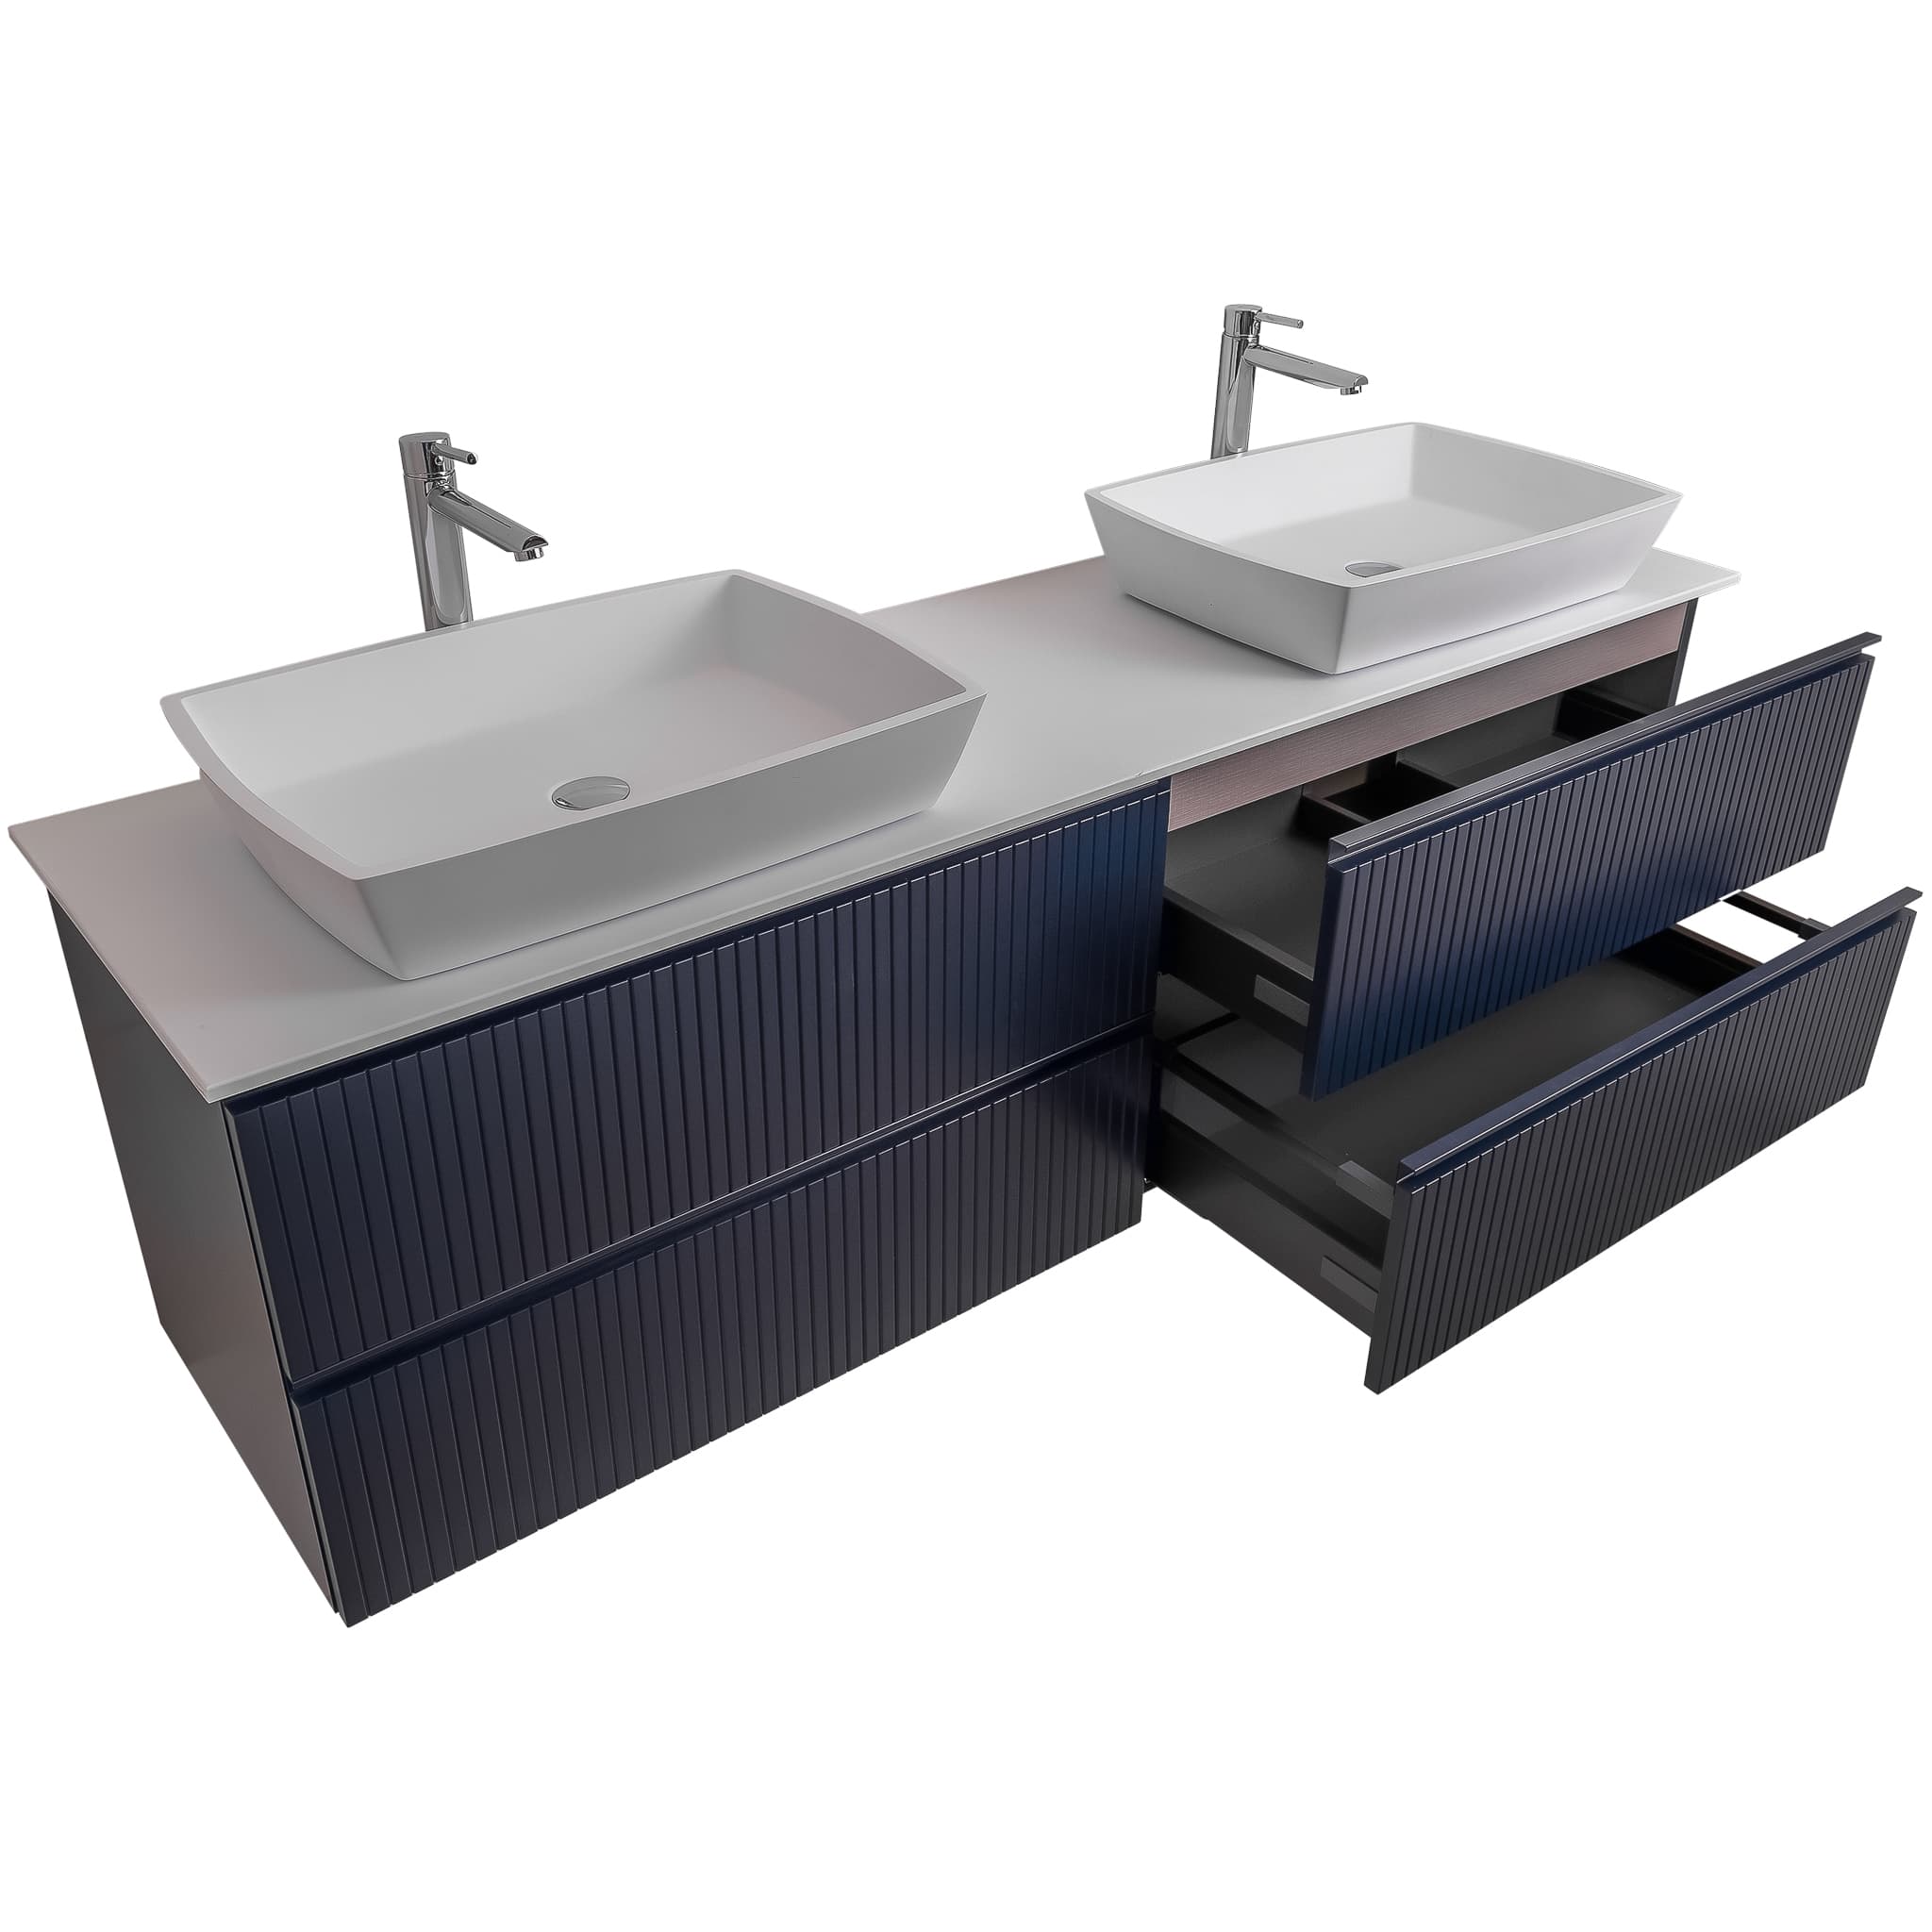 Ares 63 Matte Navy Blue Cabinet, Solid Surface Flat White Counter And Two Square Solid Surface White Basin 1316, Wall Mounted Modern Vanity Set